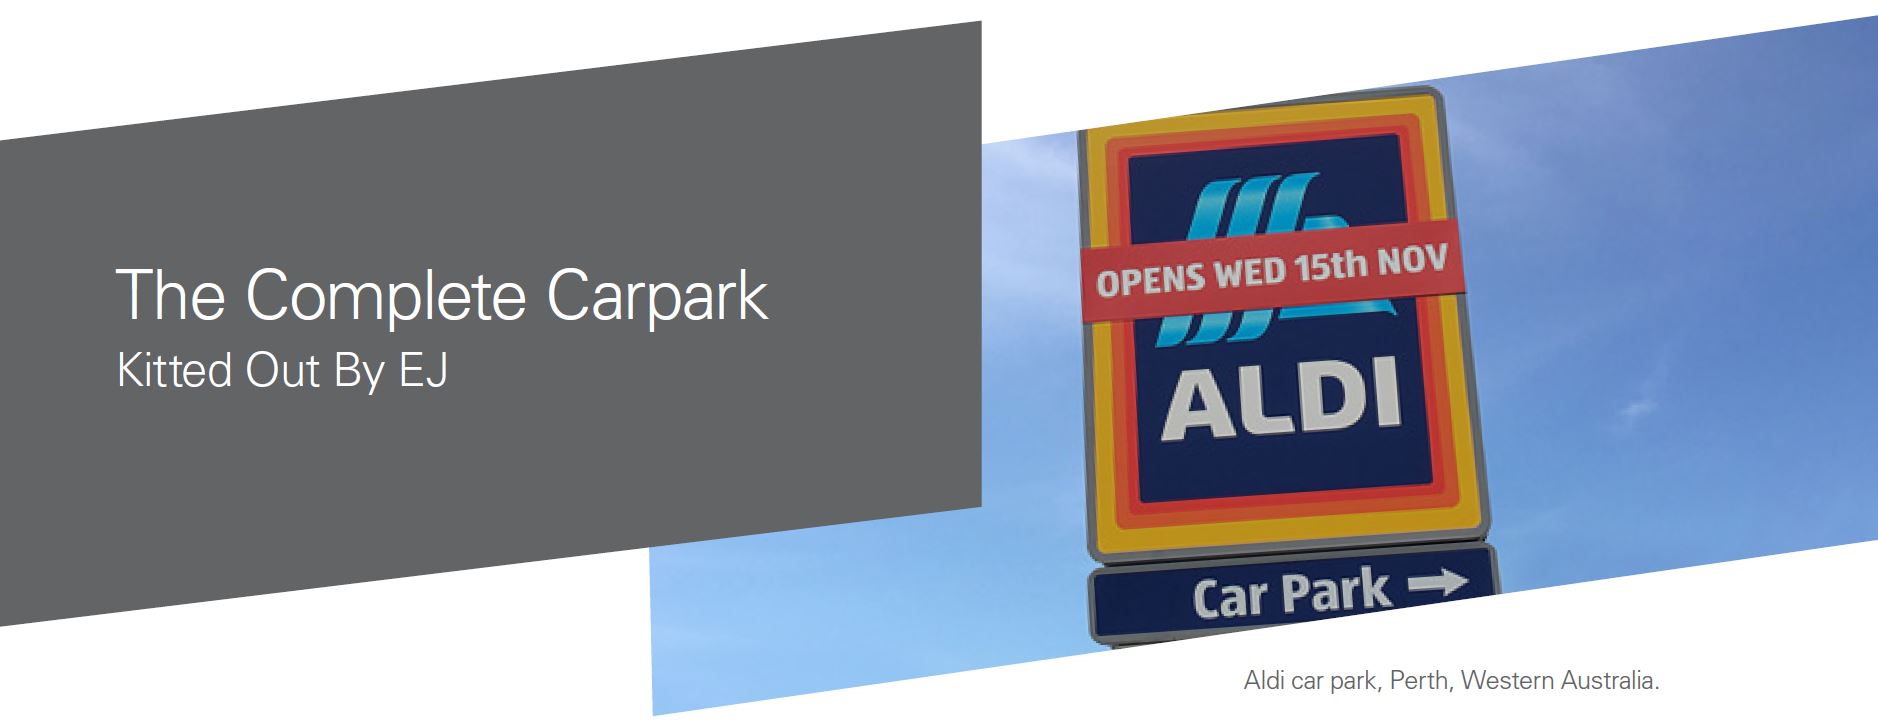 Aldi Western Australia - The Complete Carpark Kitted Out by EJ